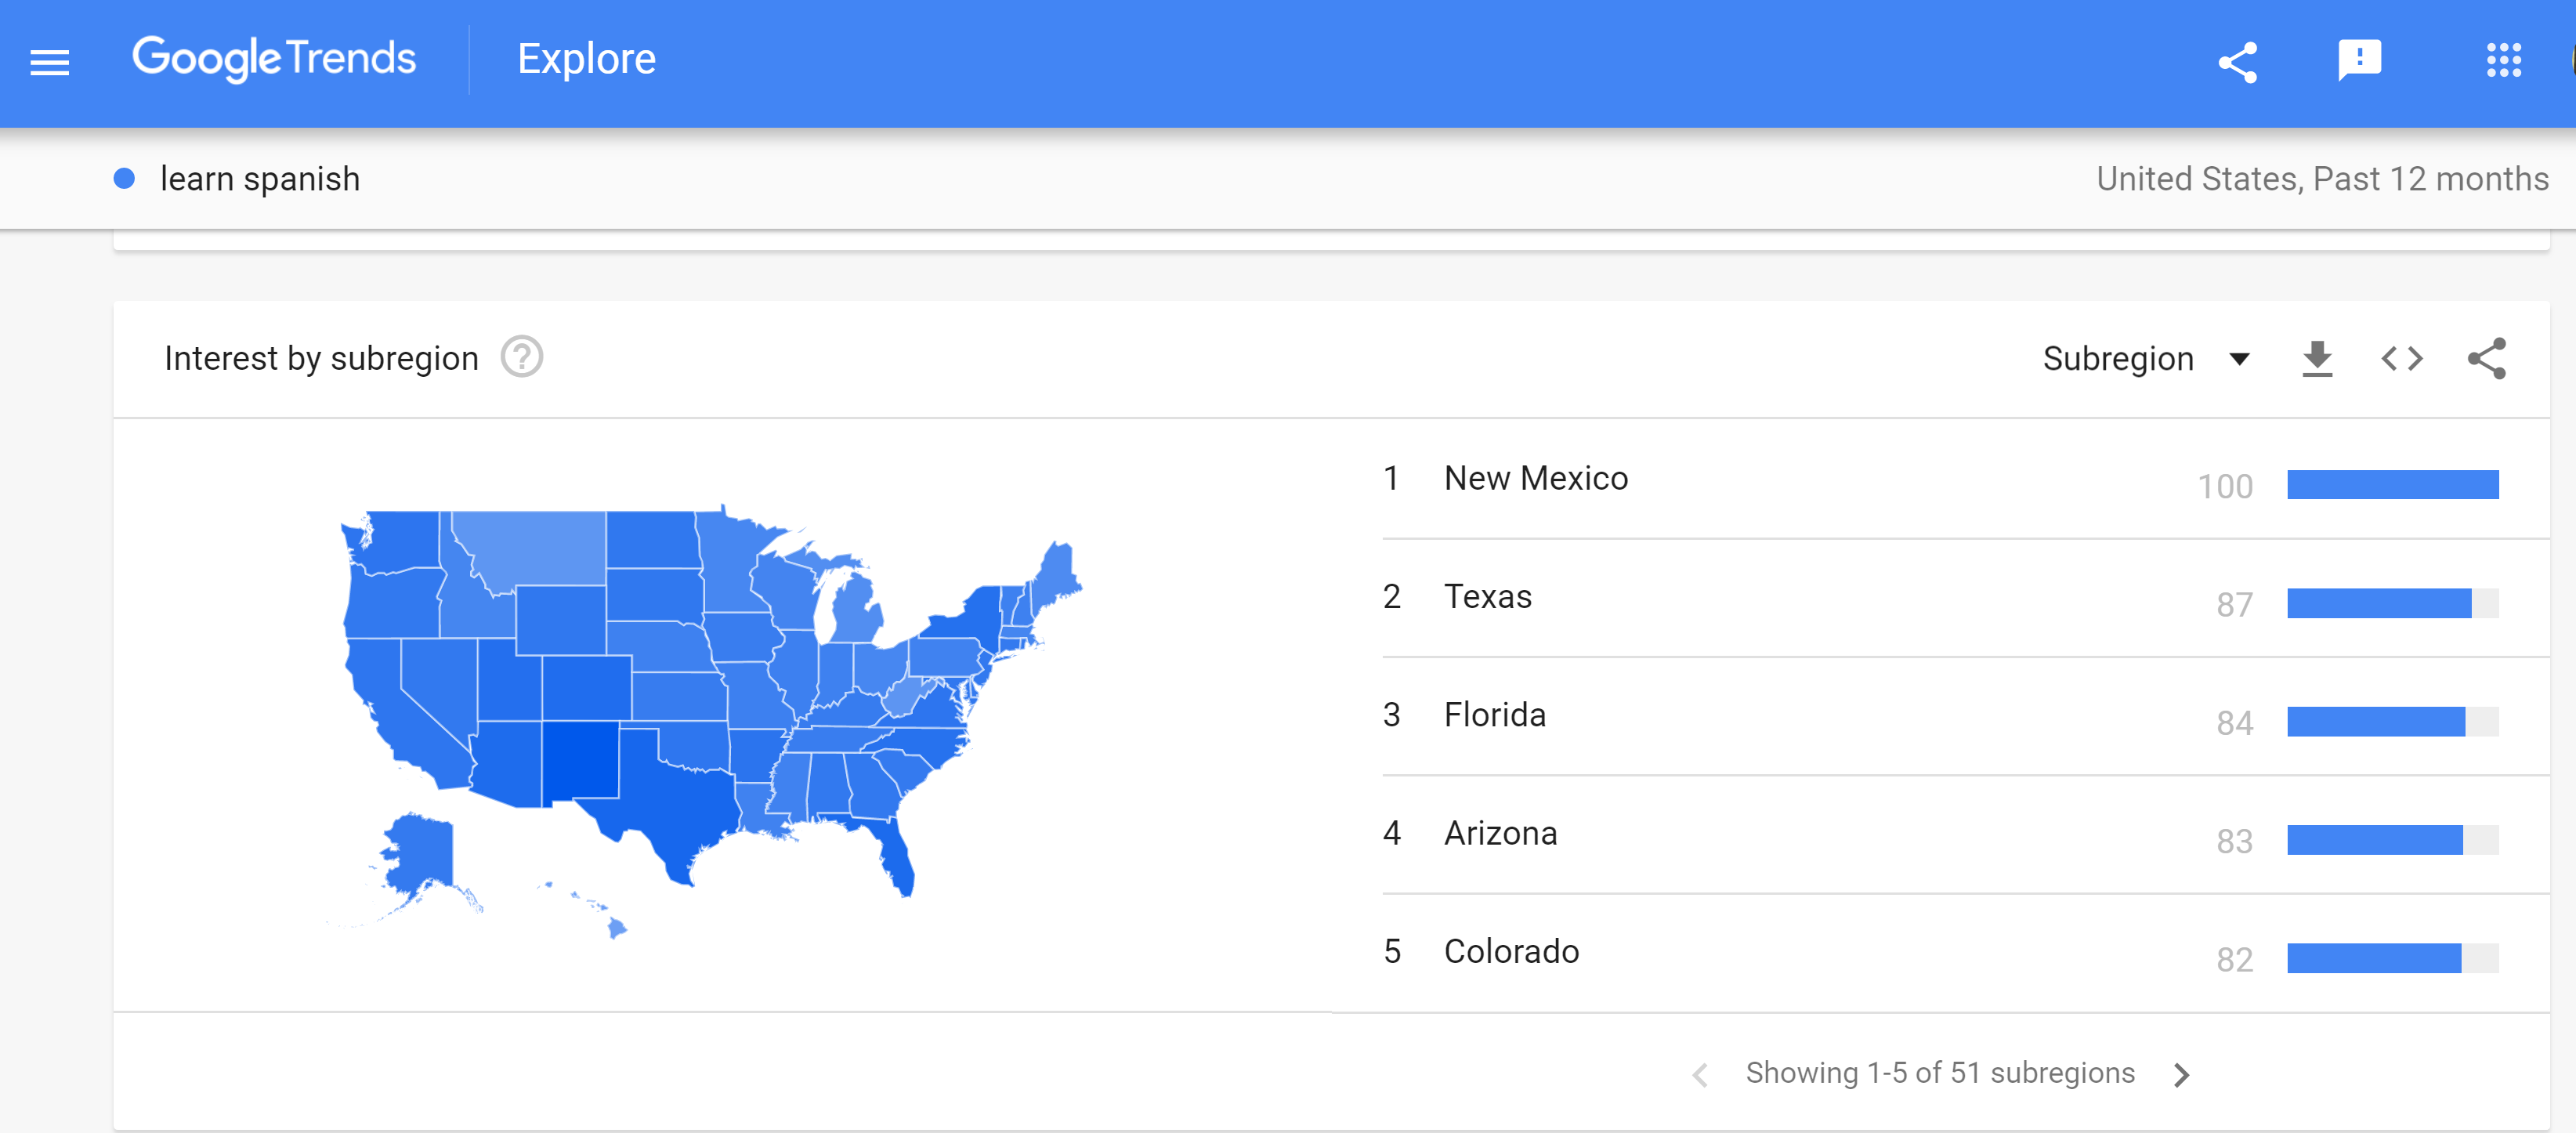 screenshot of Google Trends search results for learn Spanish states view